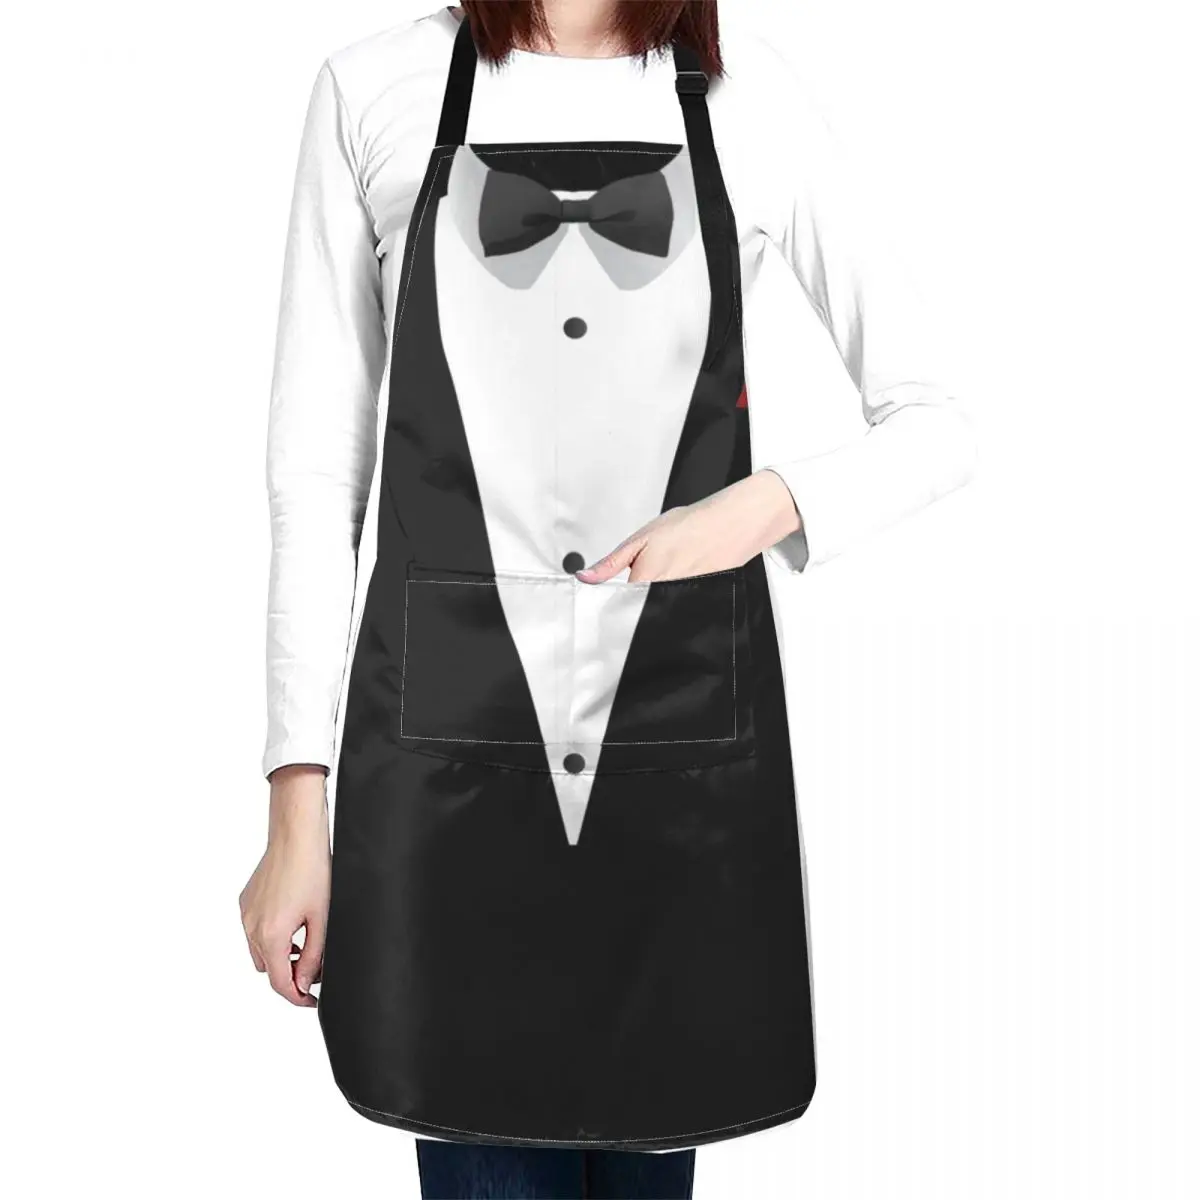 

Tuxedo design with Bowtie For Weddings And Special Occasions Apron Salon Apron Restaurant Kitchen Equipment